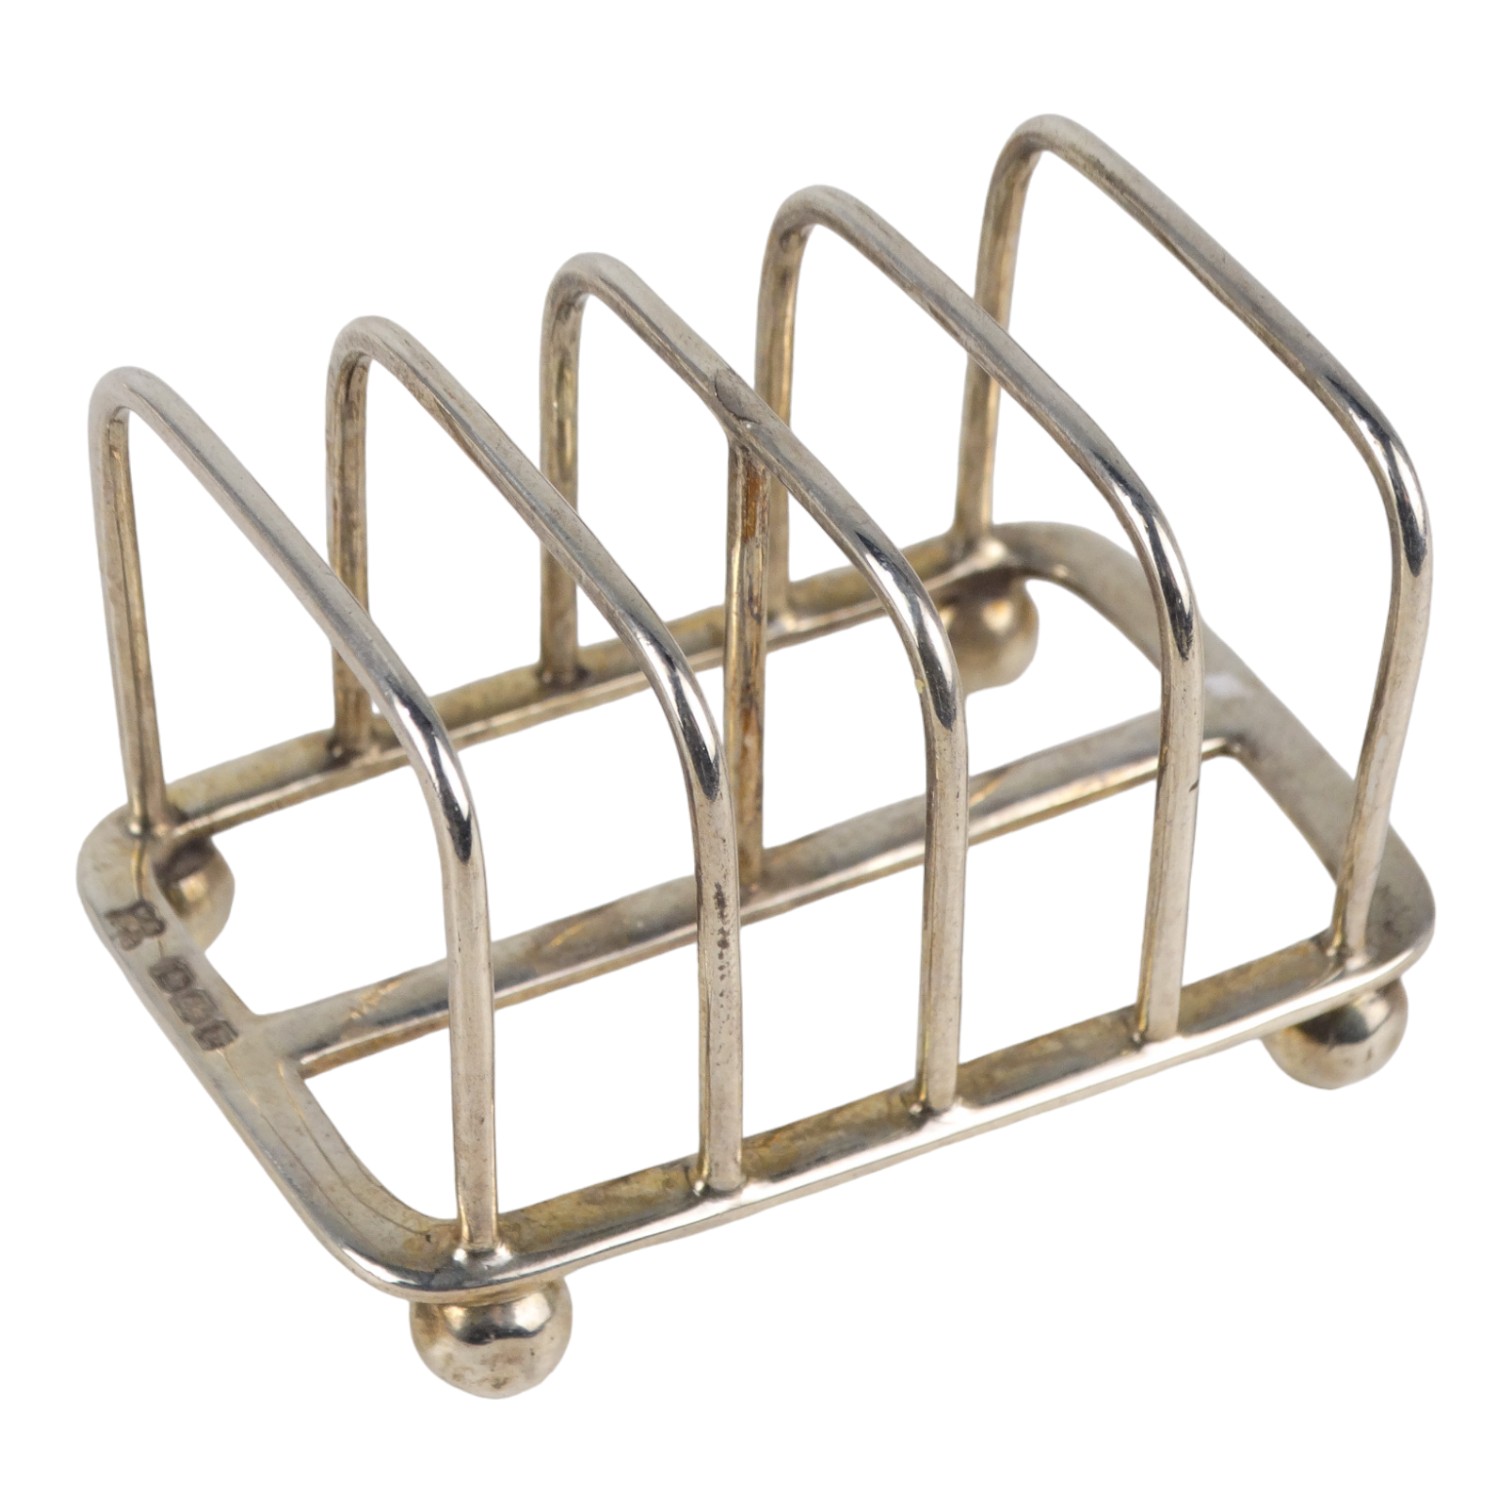 A small silver four division toast rack - Sheffield 1916, Martin Hall & Co Ltd, length 6.5cm, weight